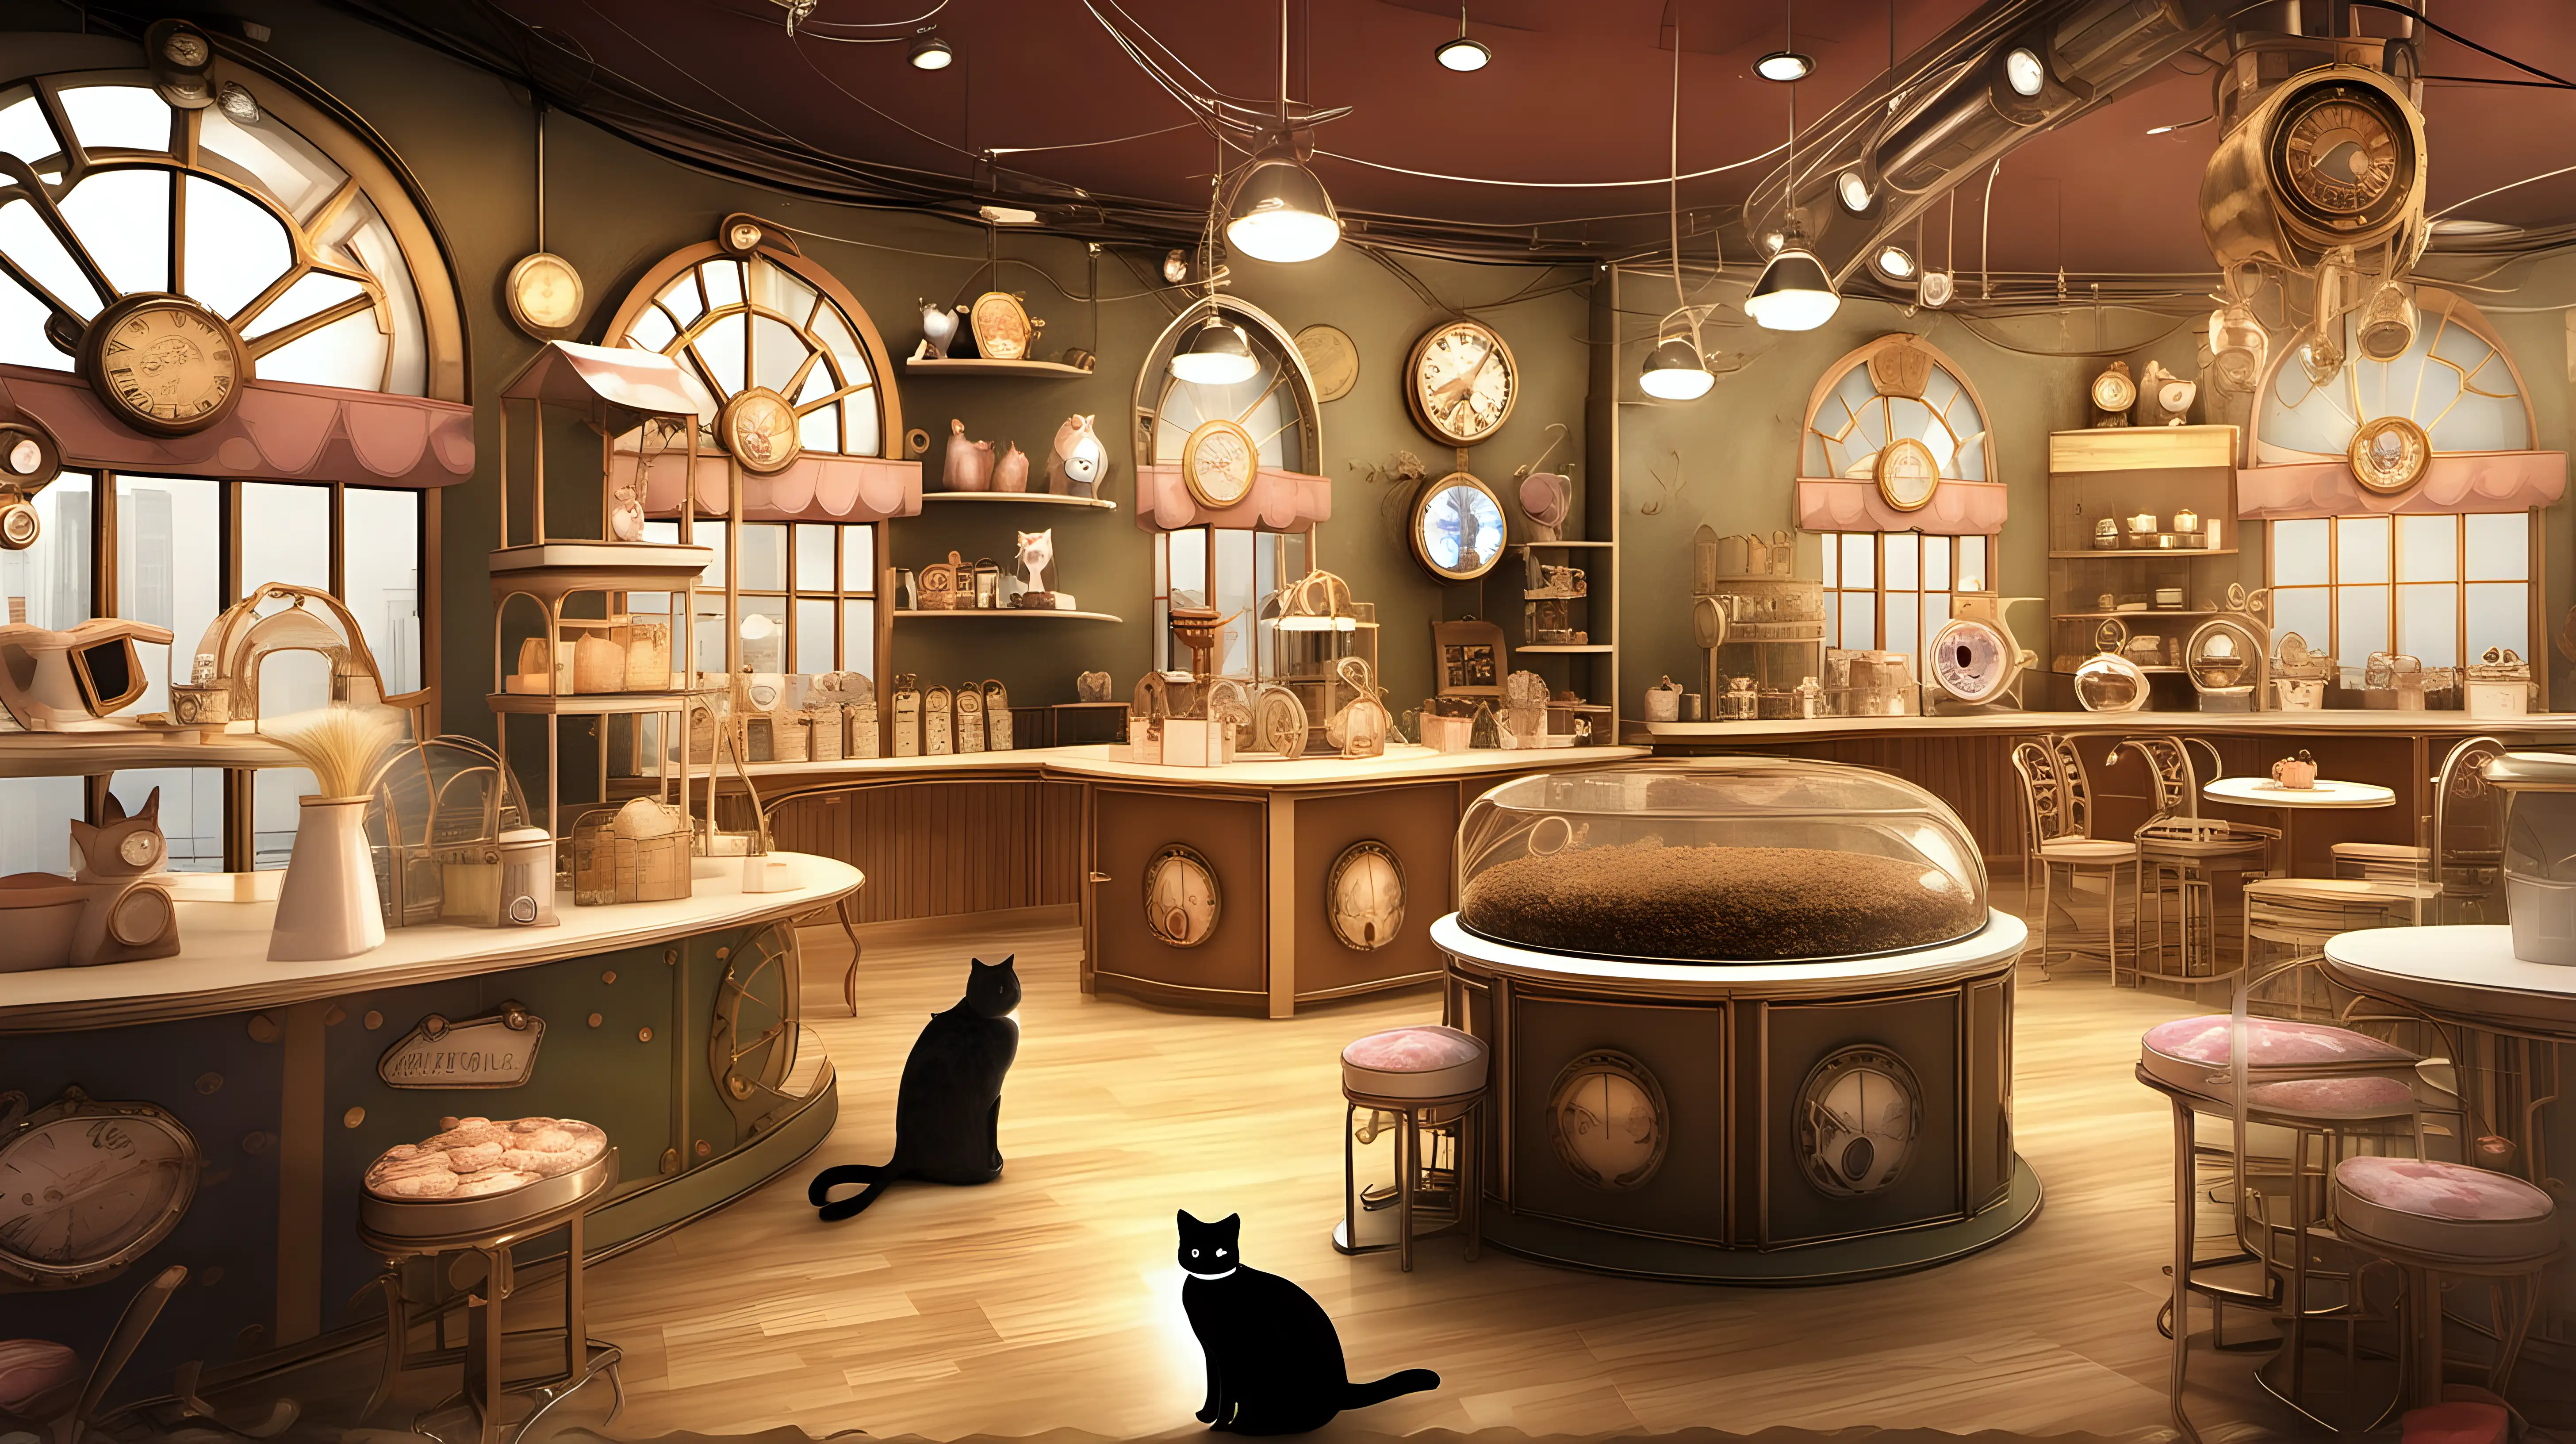 "Craft an image of a charming cat café set in a whimsical steampunk world, where cats and customers alike enjoy fanciful contraptions and delightful treats."